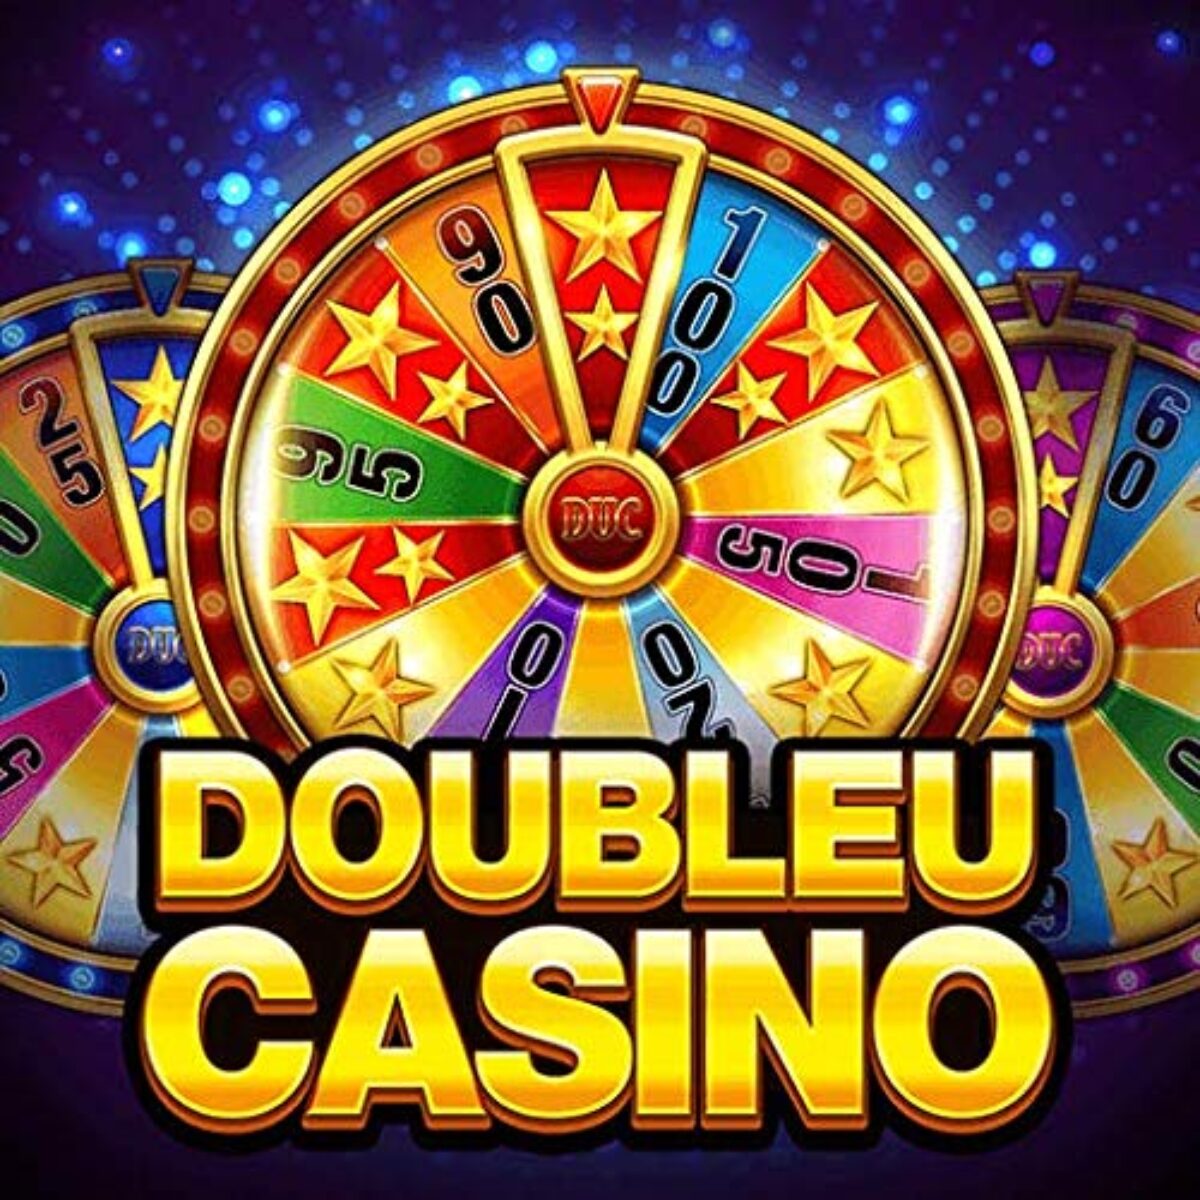 How To Get 120 Free Spins On Doubleu Casino